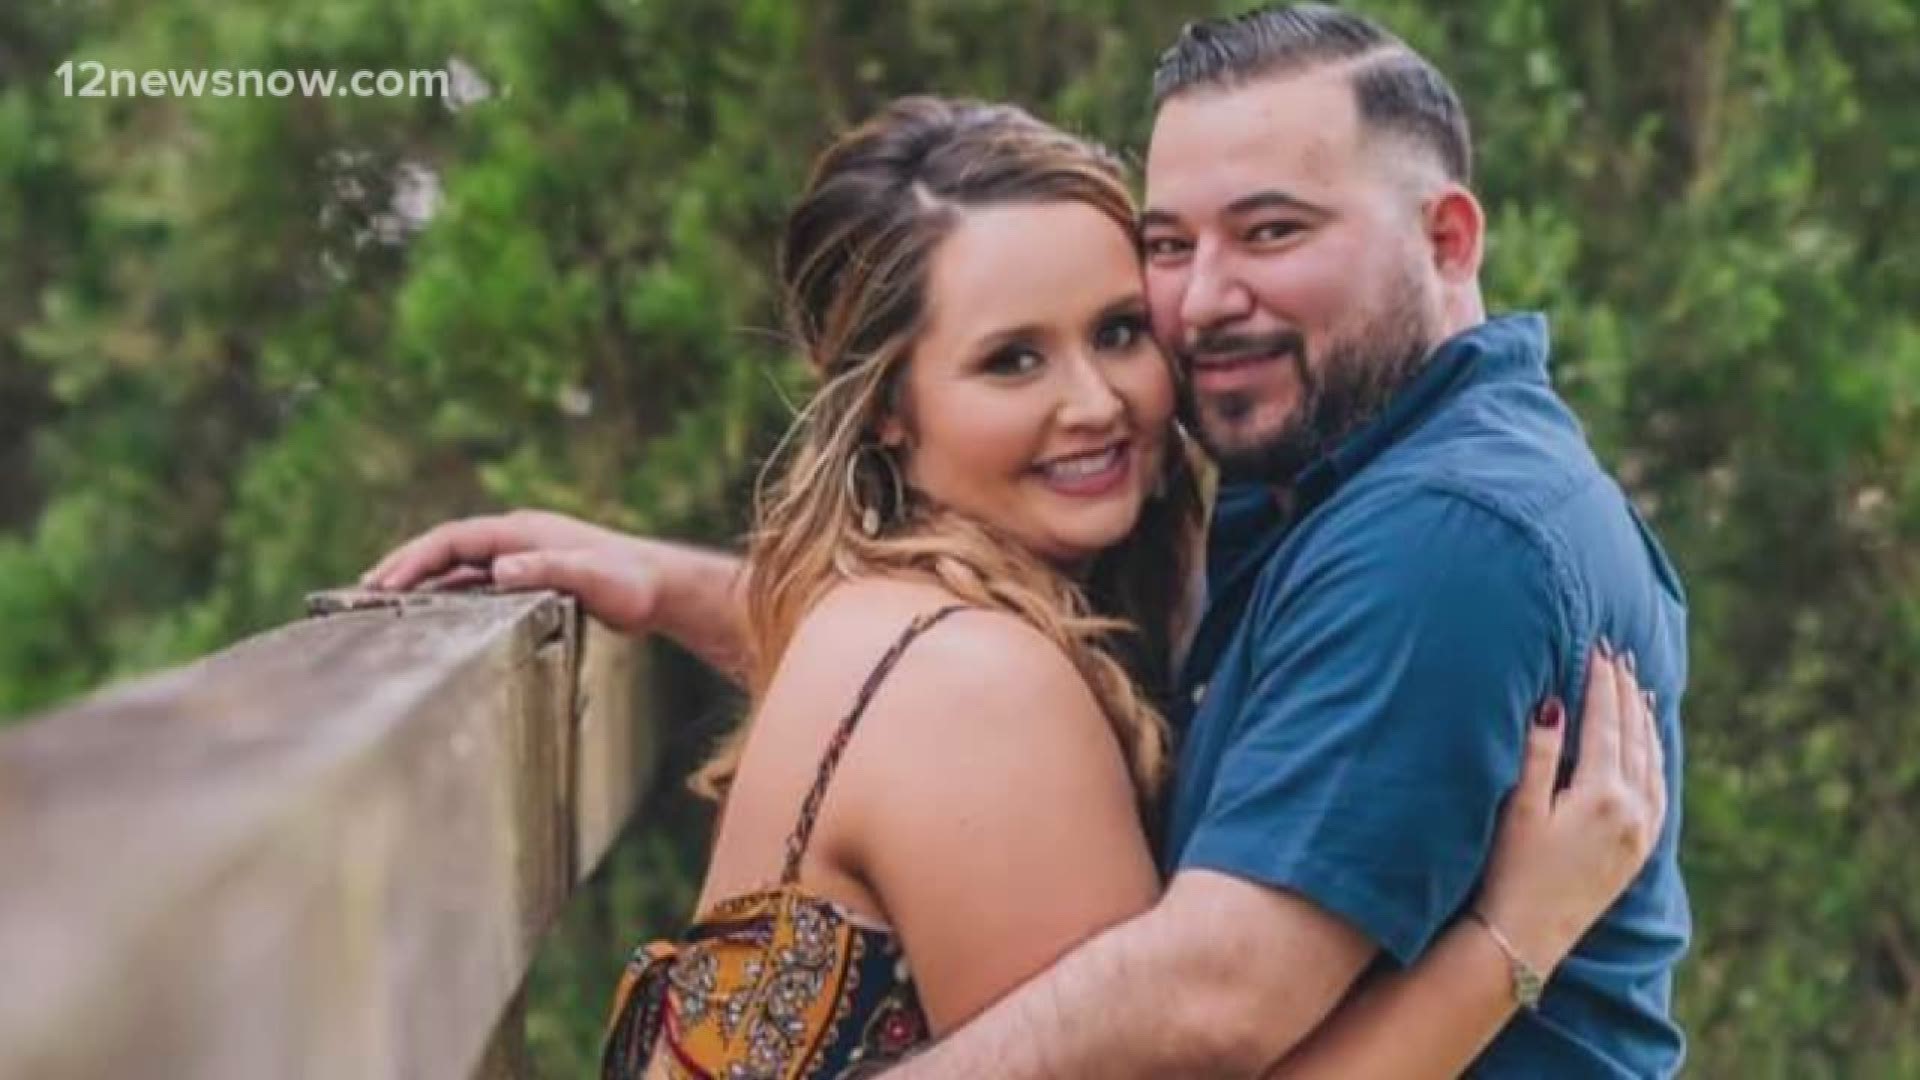 The couple planned to get married in front of hundreds of friends and family members at a venue in Beaumont